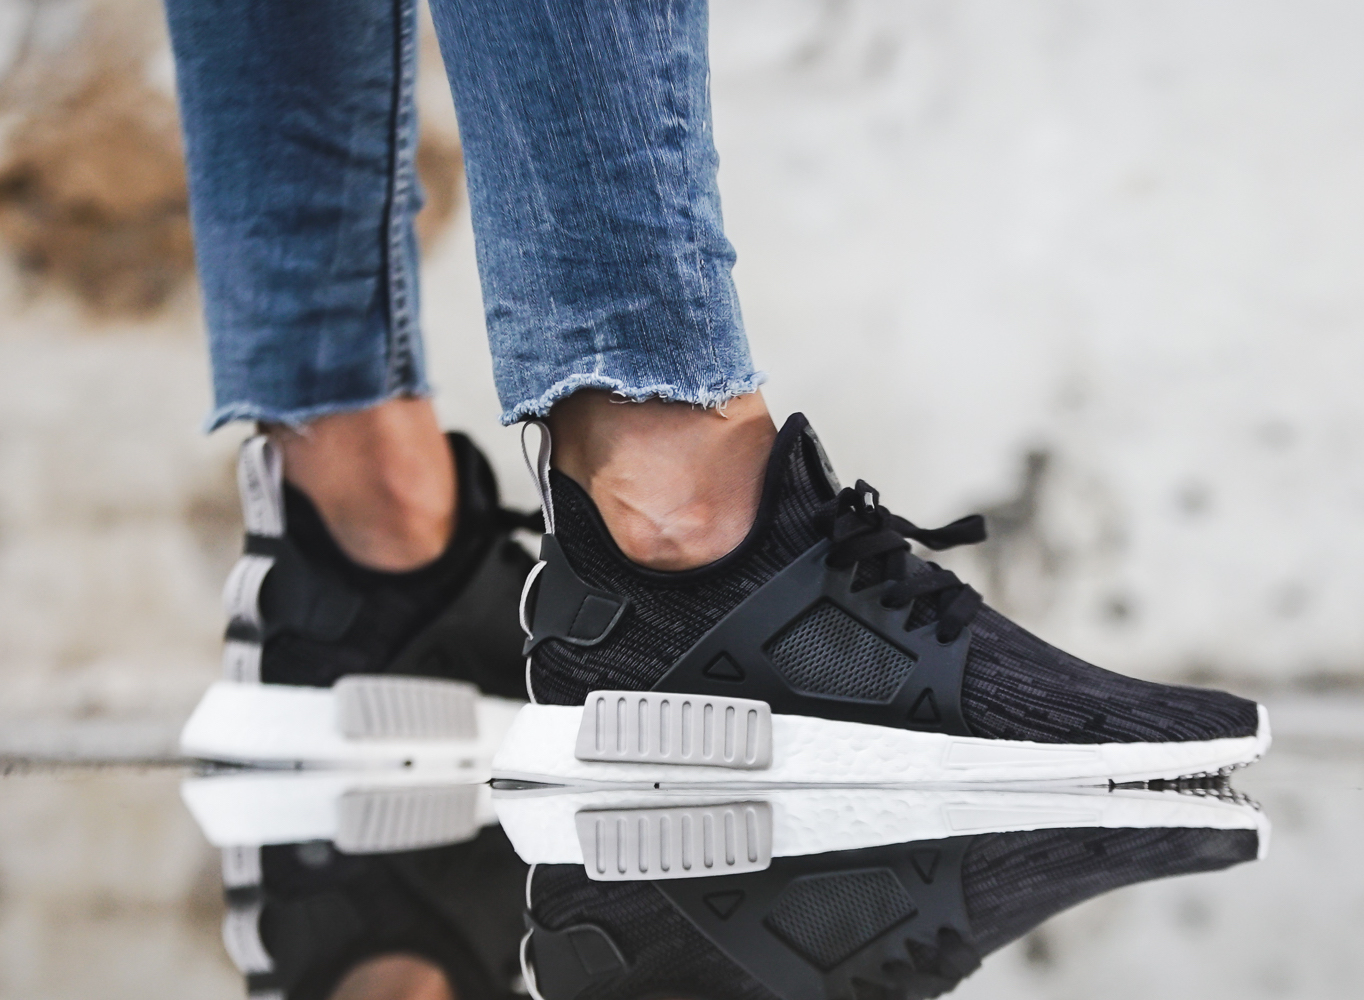 Now Available: Women's adidas NMD XR1 PK — Sneaker Shouts